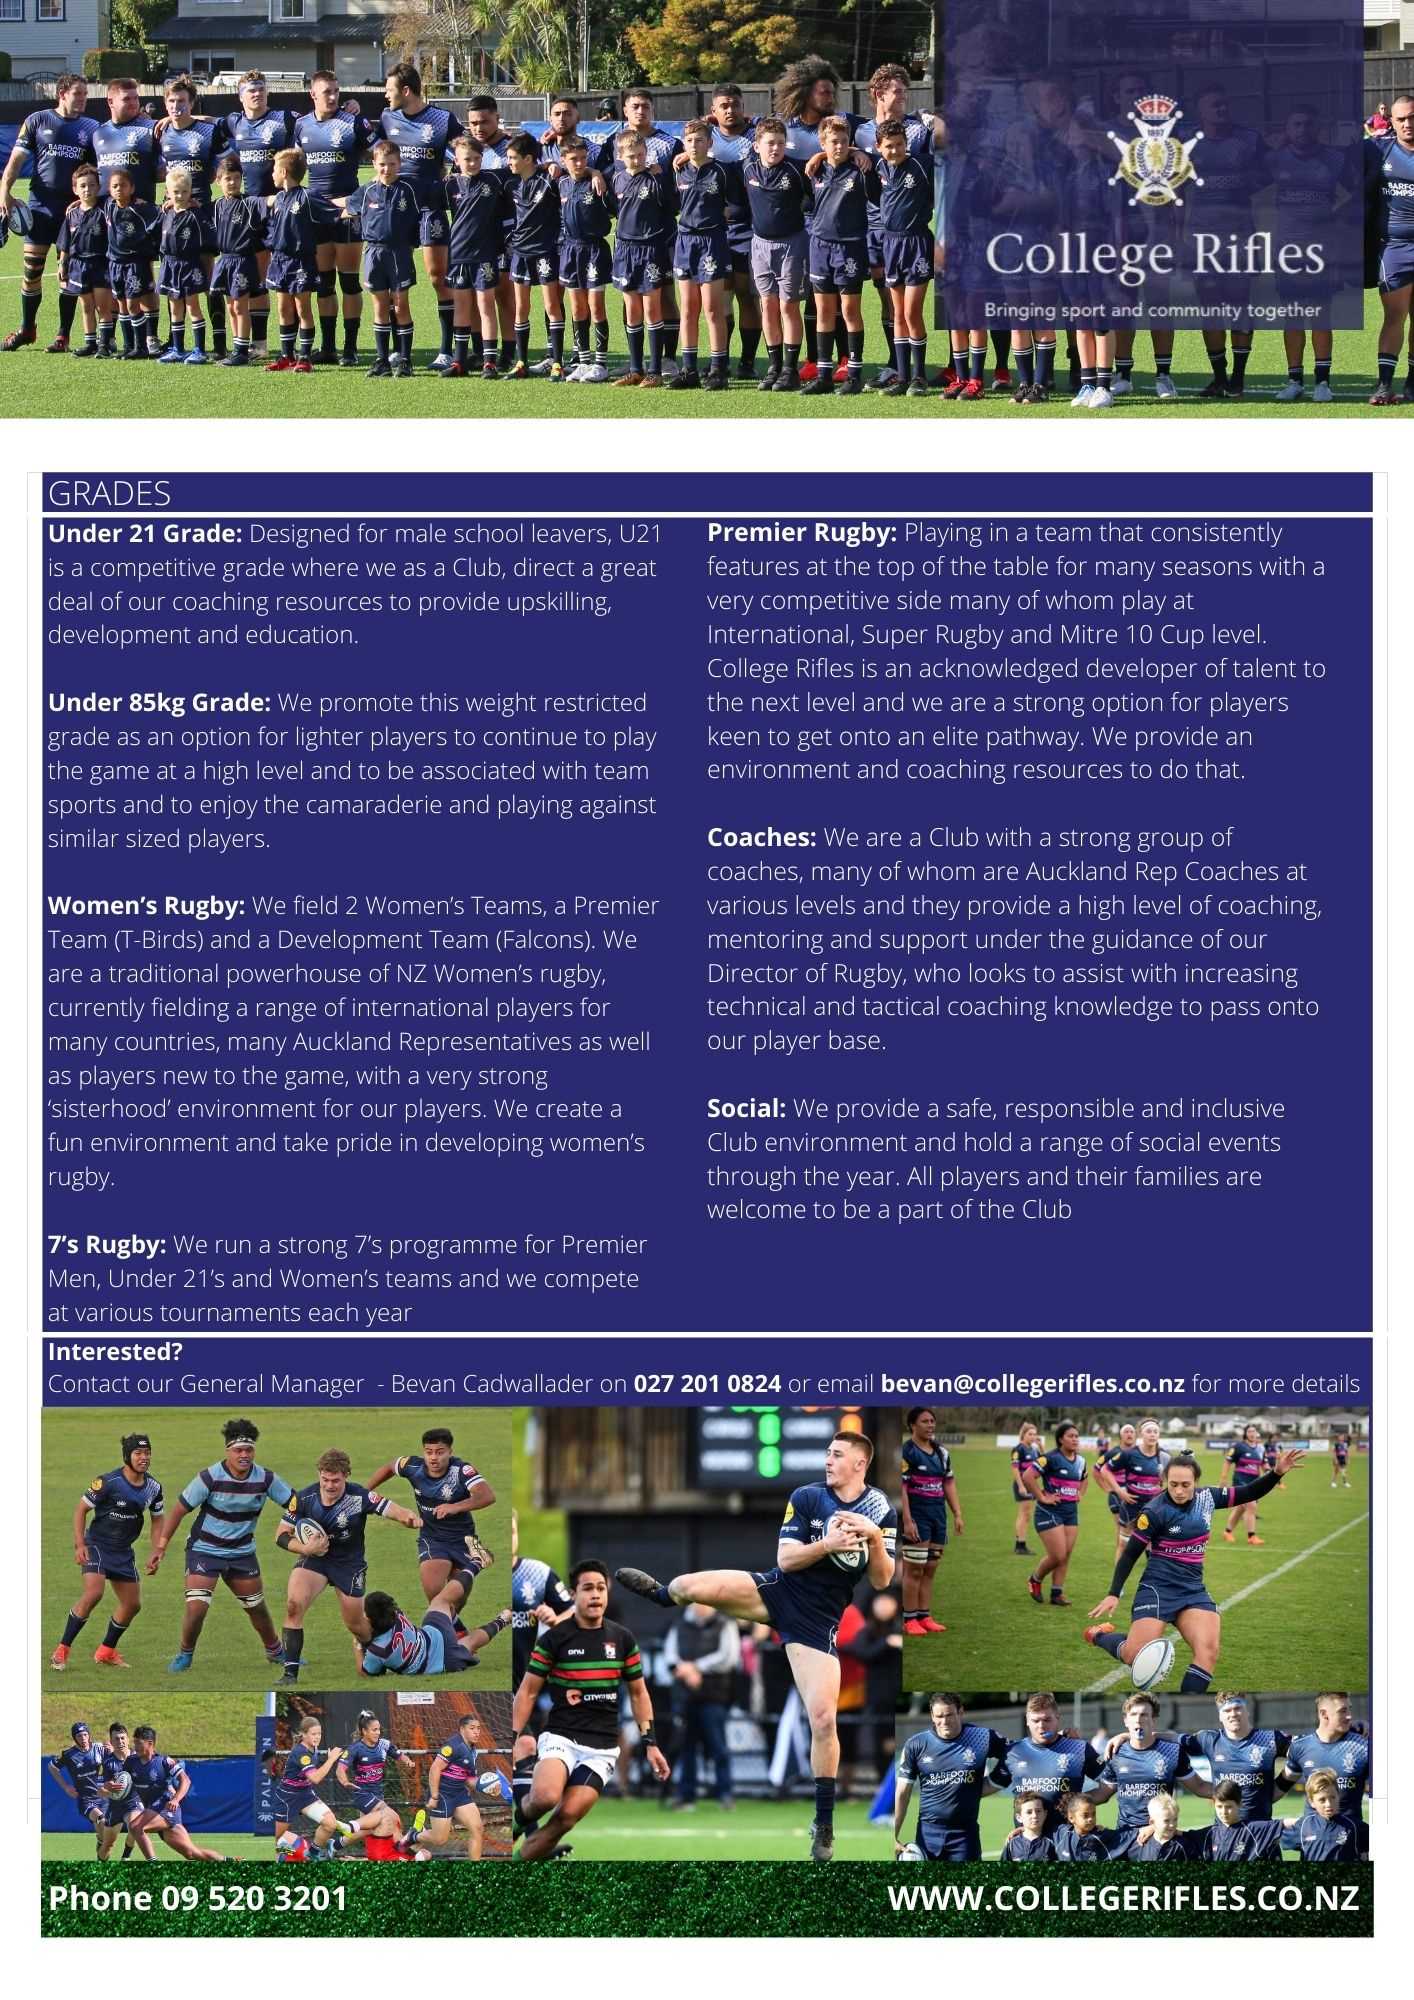 ABOUT US: College Rifles is based in Remuera, Auckland. We are a club with a strong sense of tradition but have moved with the times to provide an inclusive, safe and fun environment for our players and supporters. We are a very competitive and ambitious